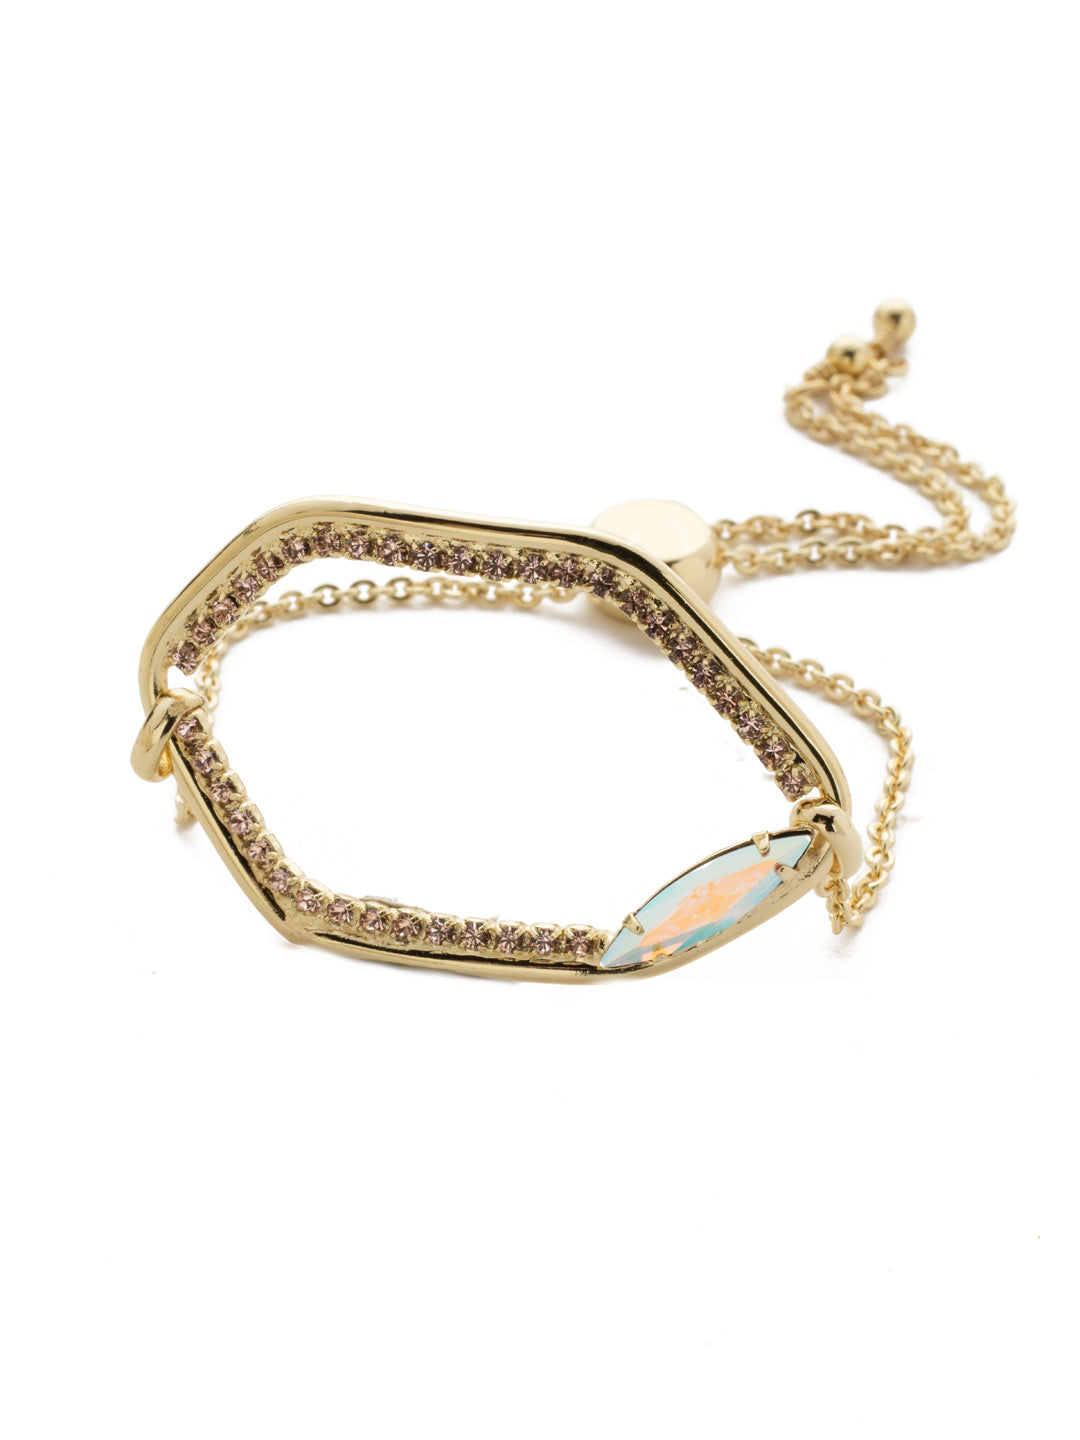 Demetria Slider Bracelet - BEH28BGISS - <p>Don't be shy. Slide on this classic bracelet stunner and make a statement. Its unique shape completely lined in crystals and accented with a navette stone demands to be noticed. Slider bracelet closure. From Sorrelli's Island Sun collection in our Bright Gold-tone finish.</p>